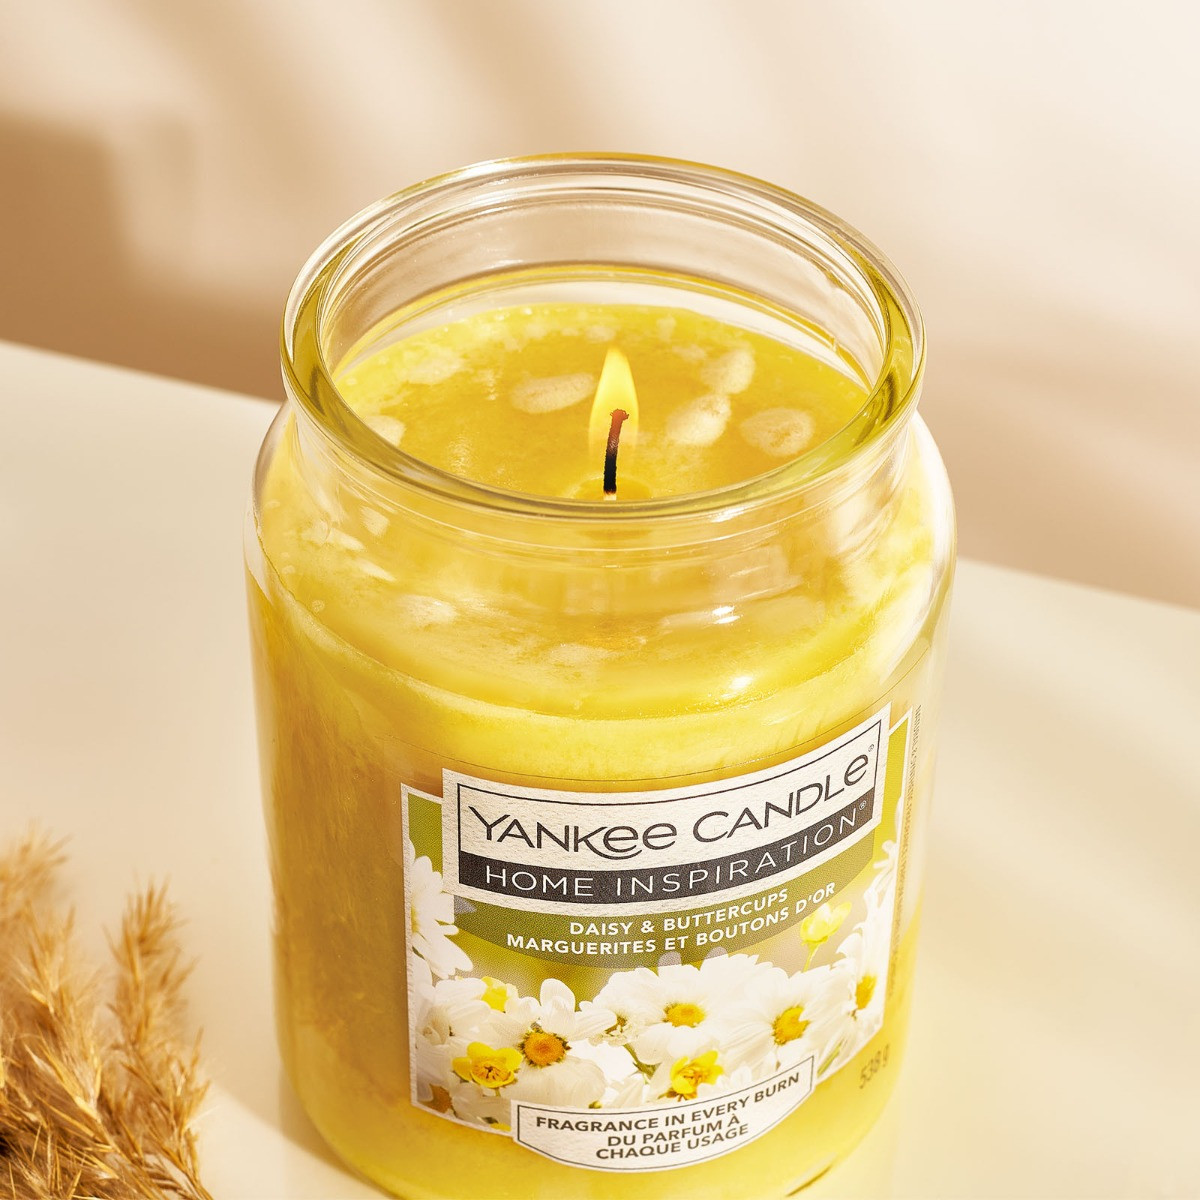 Yankee Candle Home Inspiration Large Jar - Daisy & Buttercups>